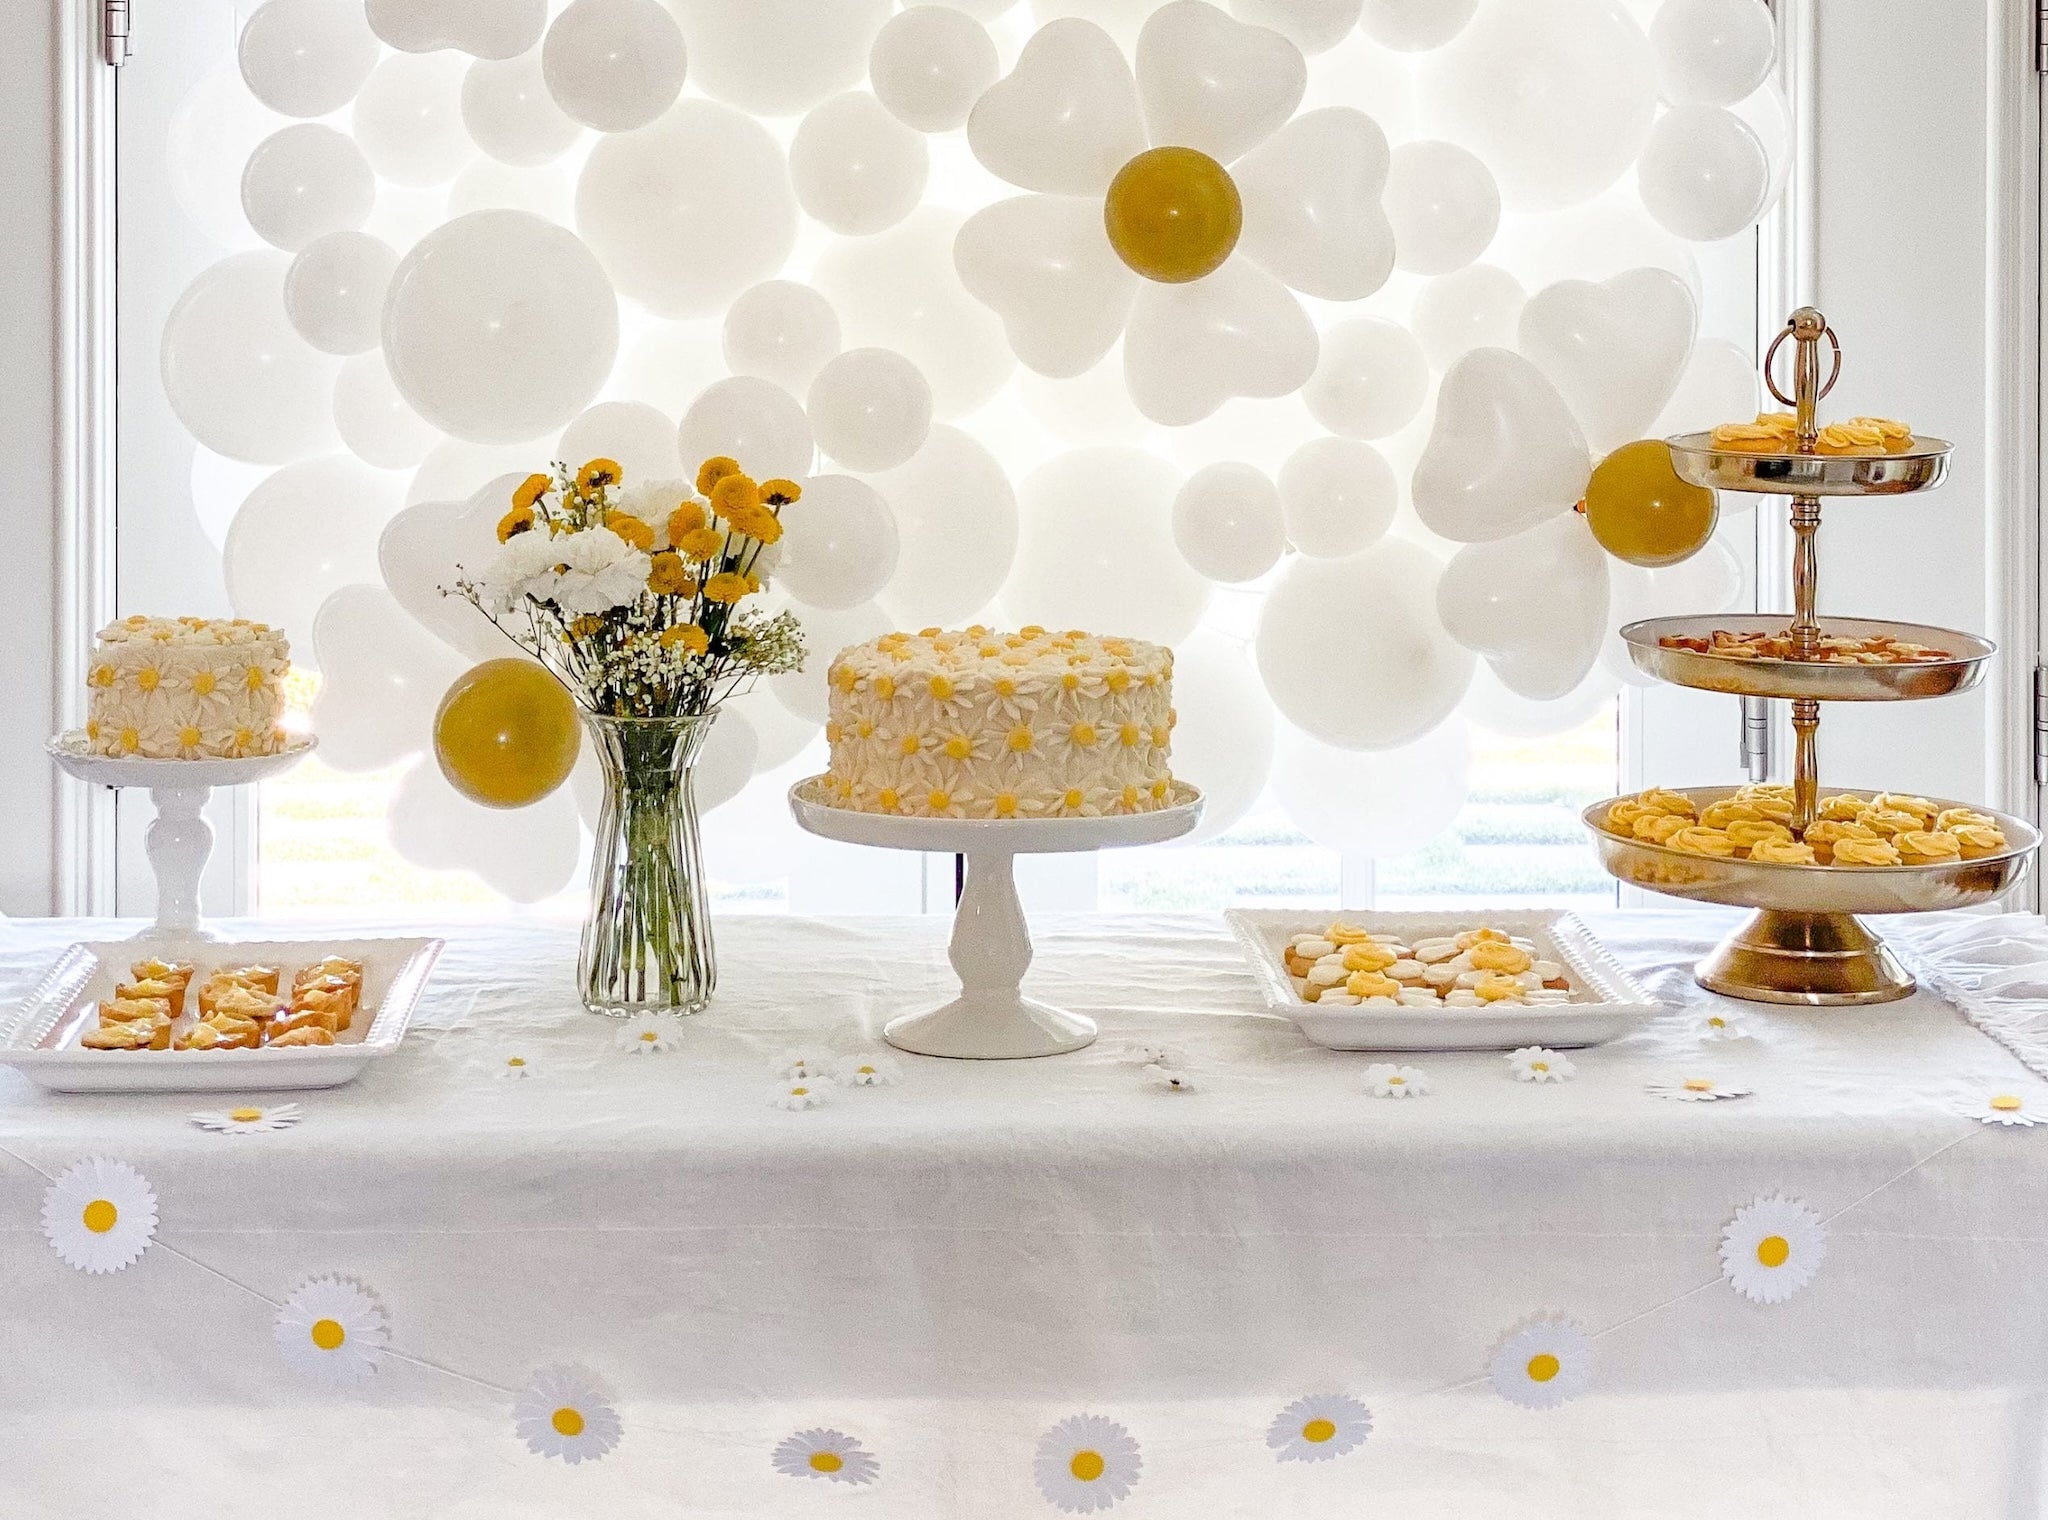 Planning The Perfect Baby Shower